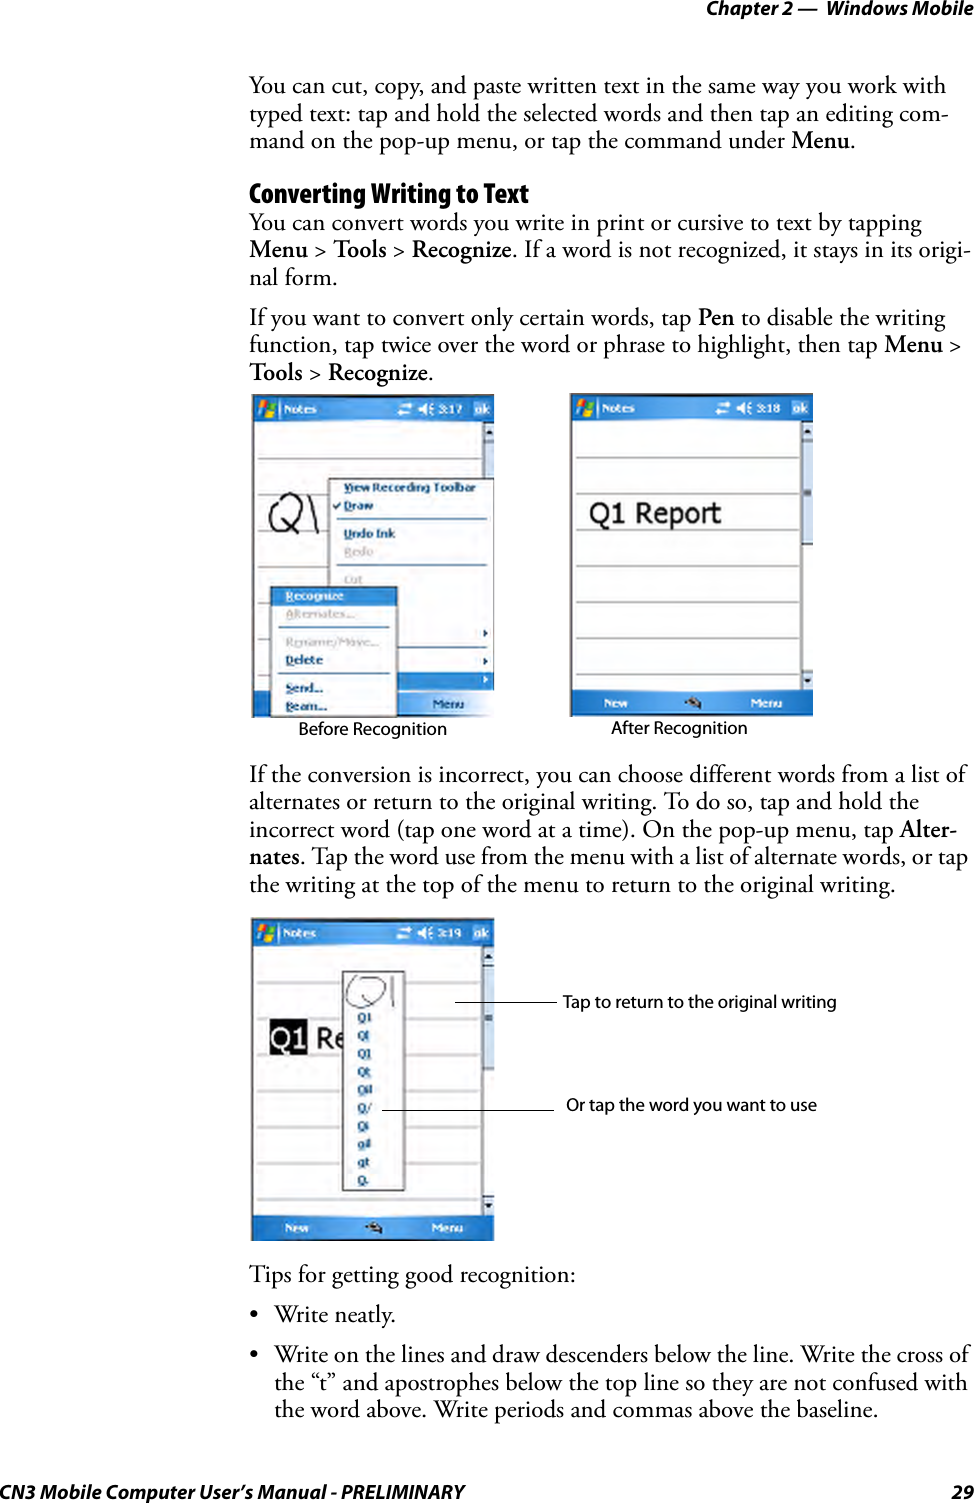 Chapter 2 —  Windows MobileCN3 Mobile Computer User’s Manual - PRELIMINARY 29You can cut, copy, and paste written text in the same way you work with typed text: tap and hold the selected words and then tap an editing com-mand on the pop-up menu, or tap the command under Menu.Converting Writing to TextYou can convert words you write in print or cursive to text by tapping Menu &gt; To o l s  &gt; Recognize. If a word is not recognized, it stays in its origi-nal form.If you want to convert only certain words, tap Pen to disable the writing function, tap twice over the word or phrase to highlight, then tap Menu &gt; Tools &gt; Recognize.If the conversion is incorrect, you can choose different words from a list of alternates or return to the original writing. To do so, tap and hold the incorrect word (tap one word at a time). On the pop-up menu, tap Alter-nates. Tap the word use from the menu with a list of alternate words, or tap the writing at the top of the menu to return to the original writing.Tips for getting good recognition:• Write neatly.• Write on the lines and draw descenders below the line. Write the cross of the “t” and apostrophes below the top line so they are not confused with the word above. Write periods and commas above the baseline.Before Recognition After RecognitionTap to return to the original writingOr tap the word you want to use